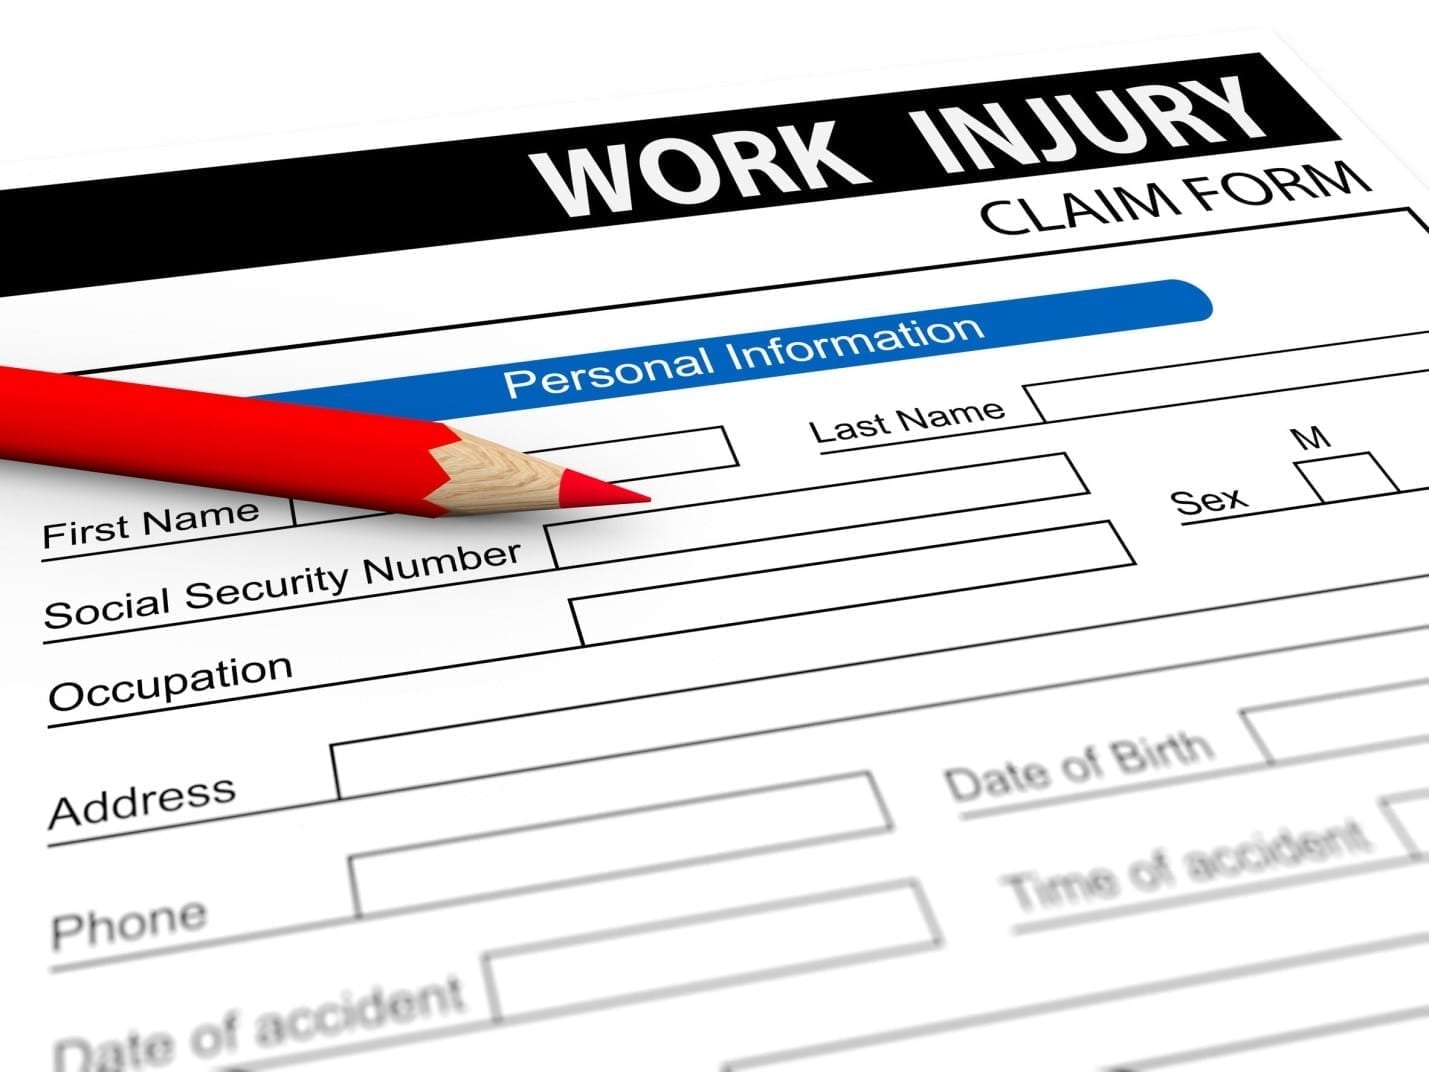 Fort Lauderdale Work Injury Claims Lawyer